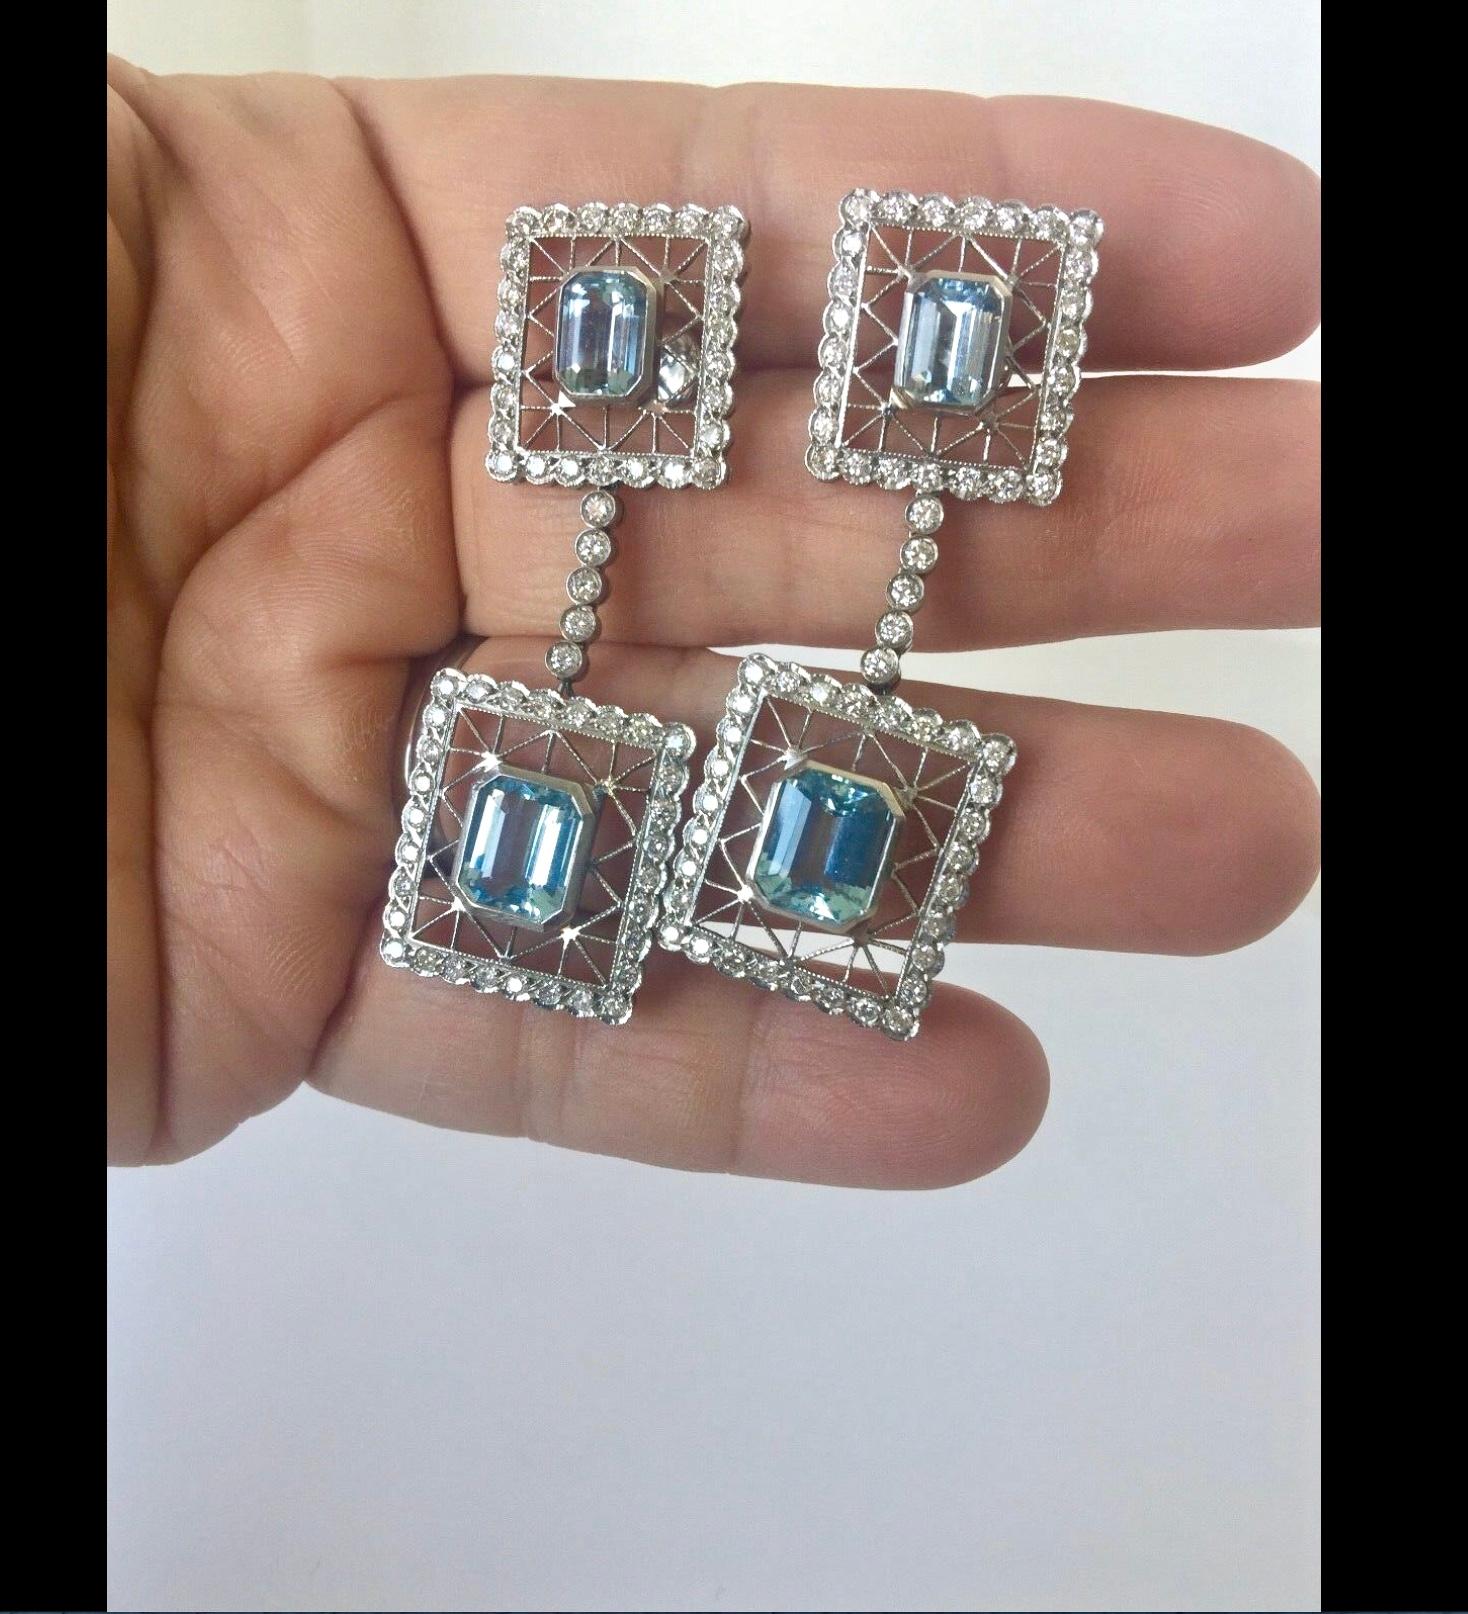 Reminiscent of the Deco era, these radiant drop Aquamarine Diamonds earrings have elegant Aquamarine emerald cut stones detailed with diamonds and crafted in 18K white gold.
Pure sparkle!! 10 carat four bright emerald cut Aquas -fall in line to